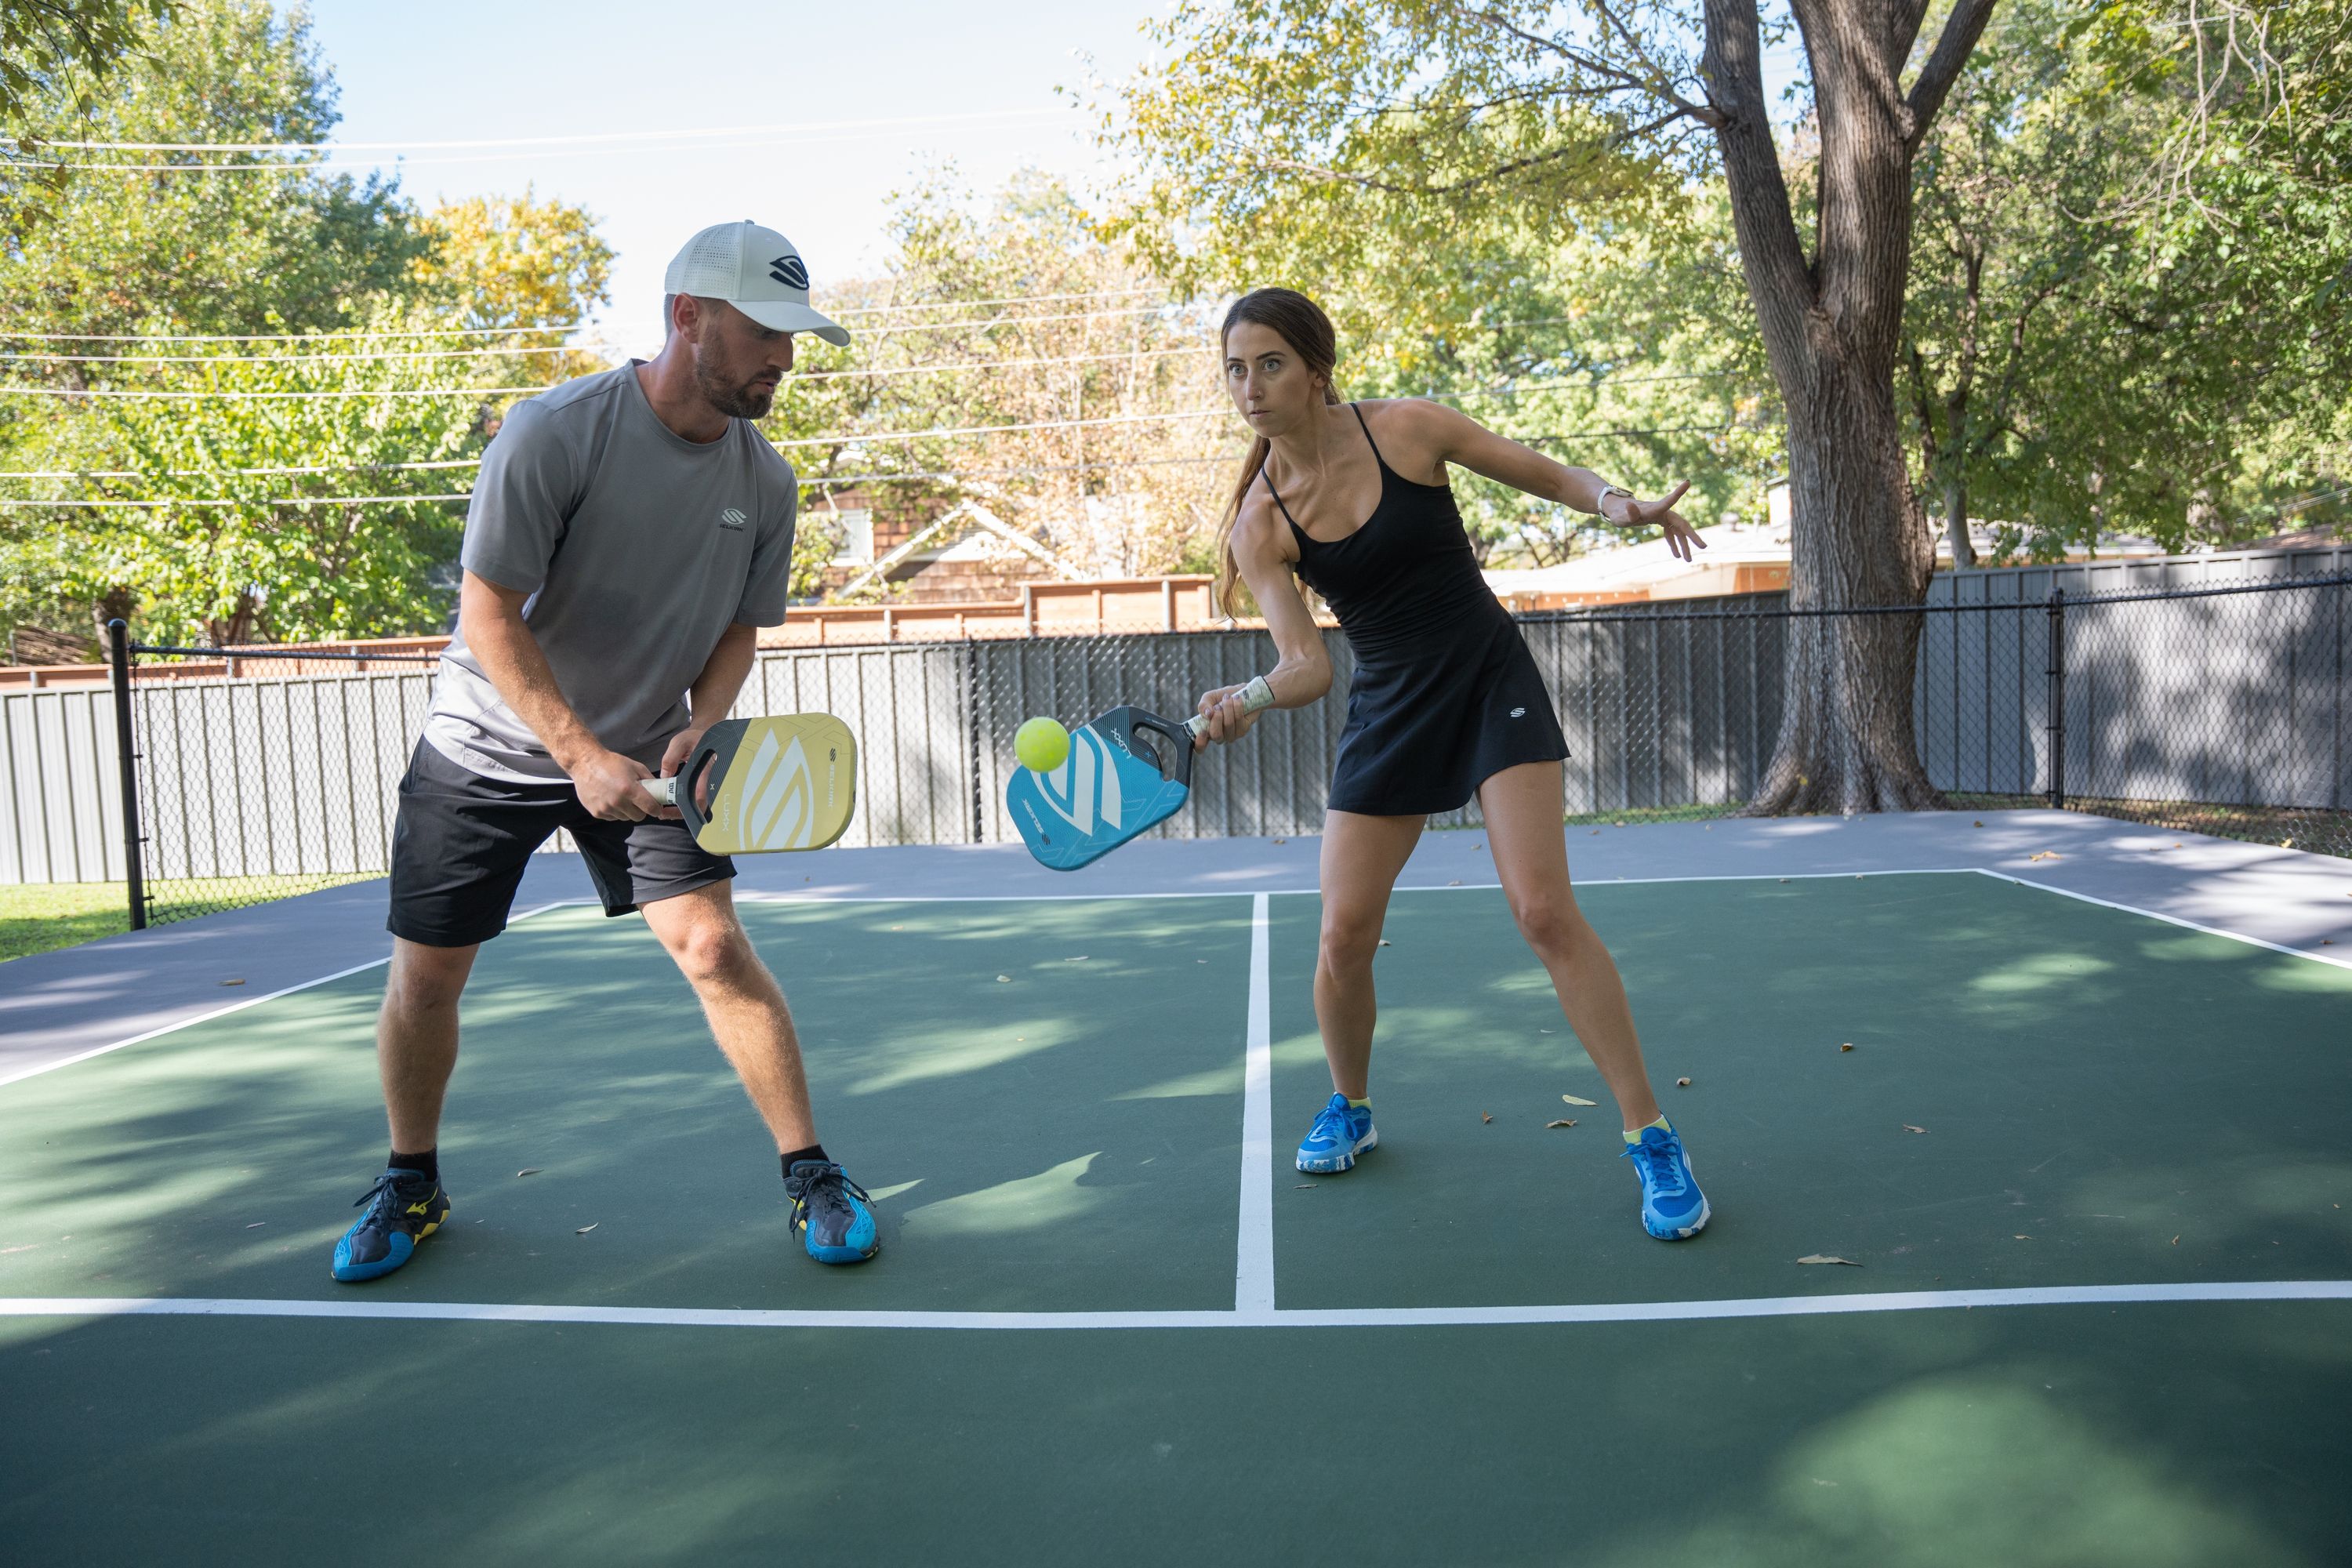 If you are considering playing pickleball with your spouse or other significant other, you may want to consider a few things before getting started.